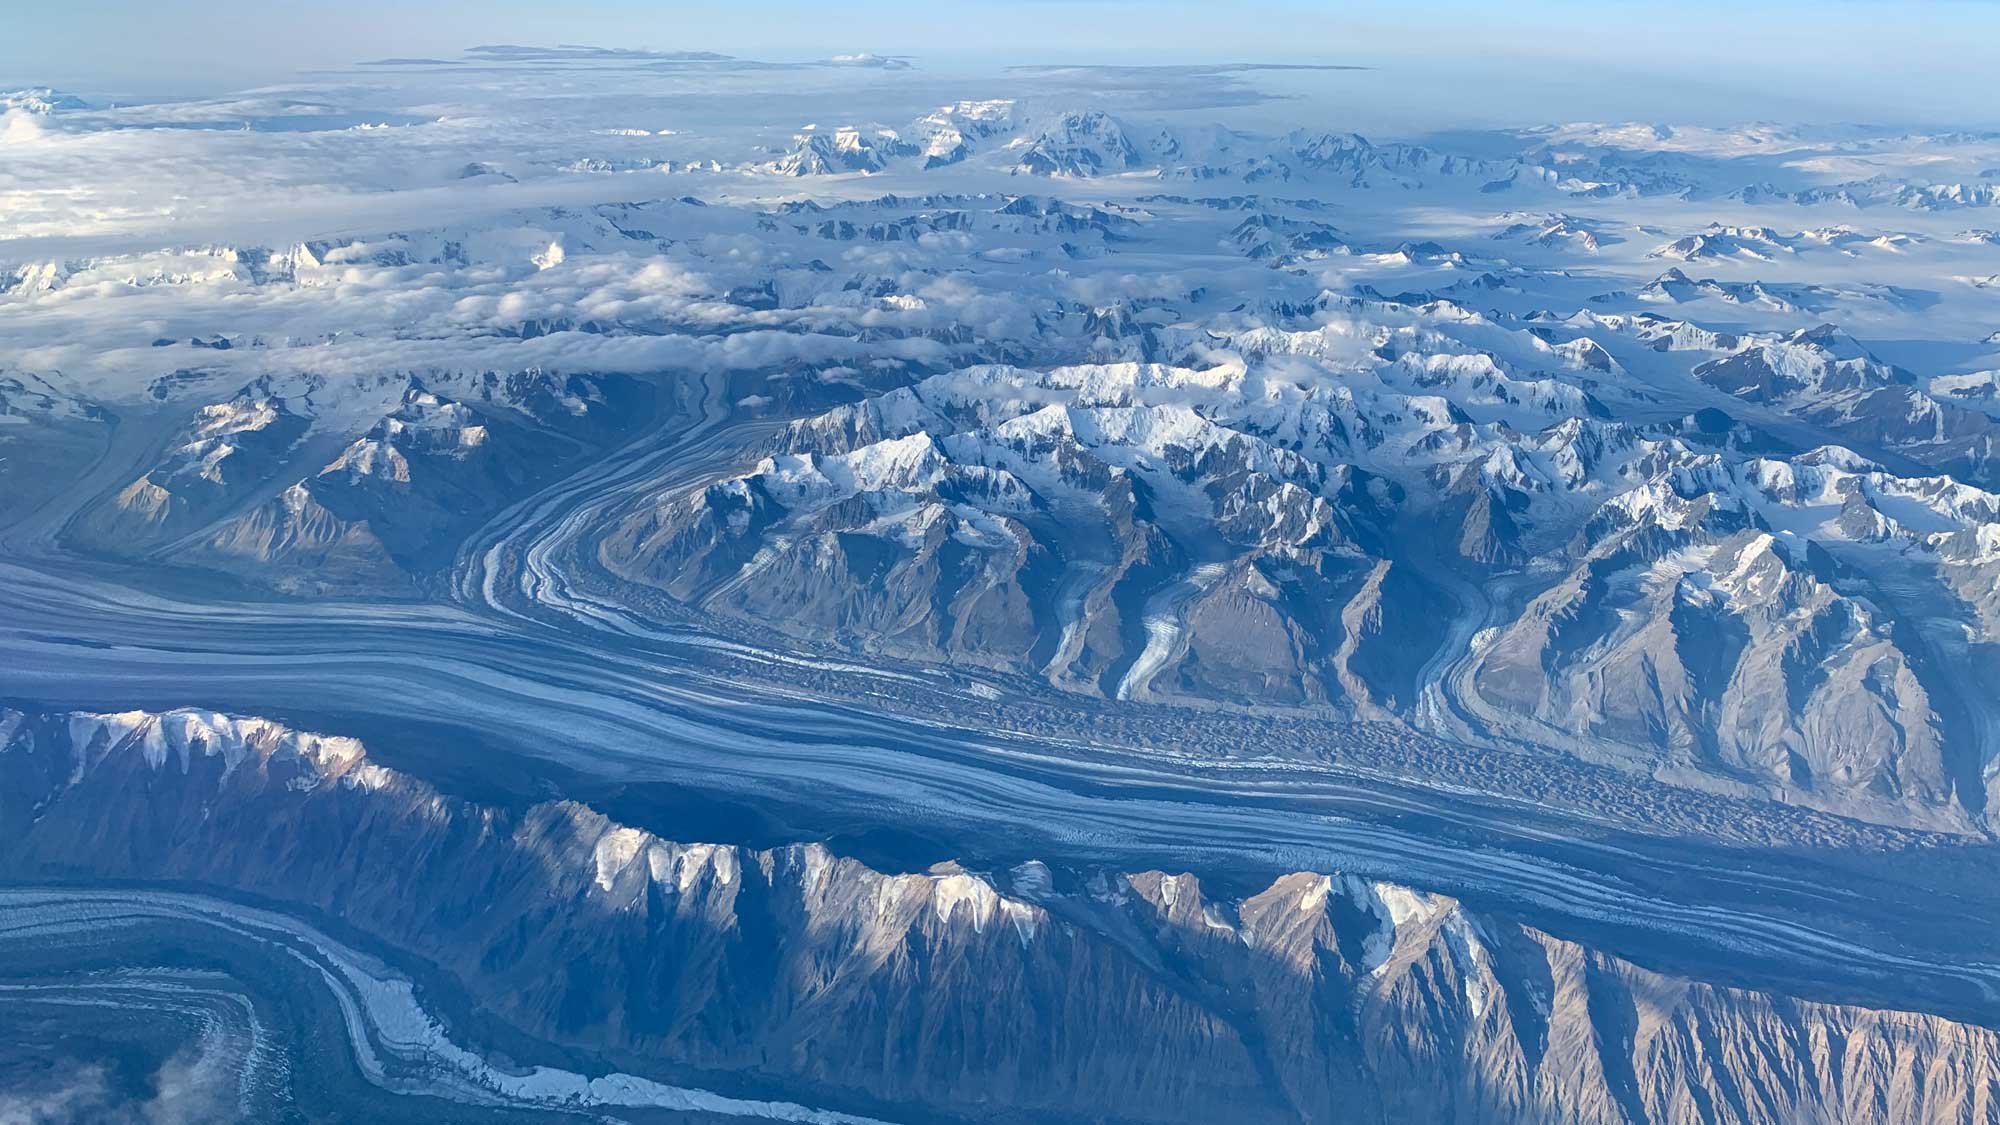 Aerial photograph of river-like glaciers in Alaska.